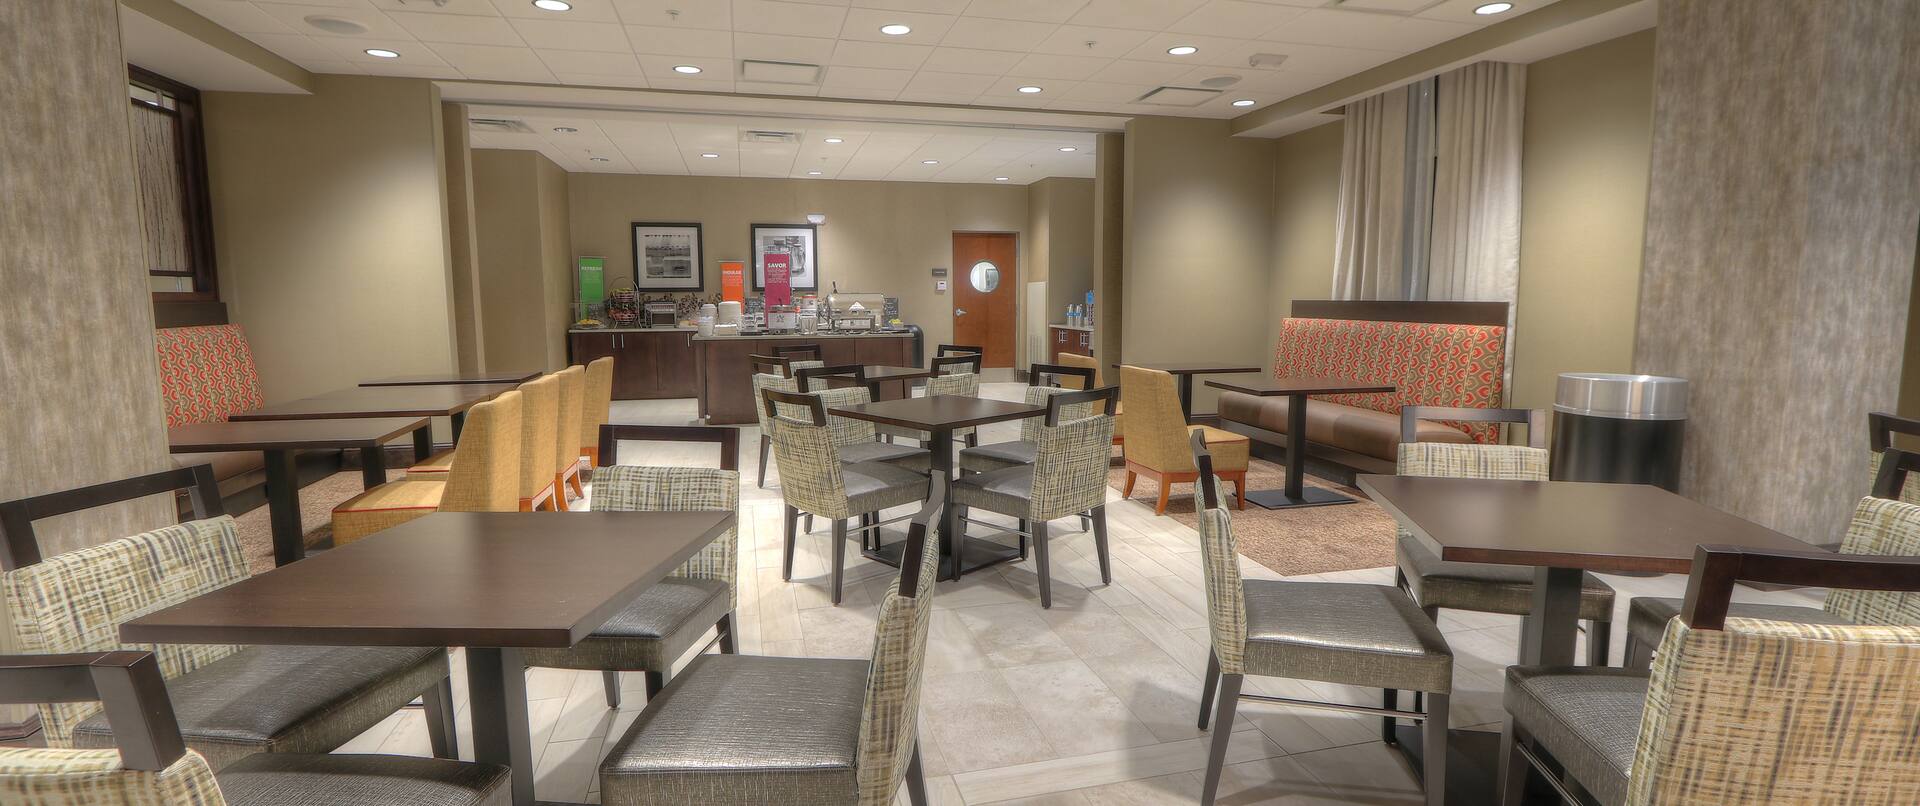 Restaurant Dining Area with Chairs and Tables